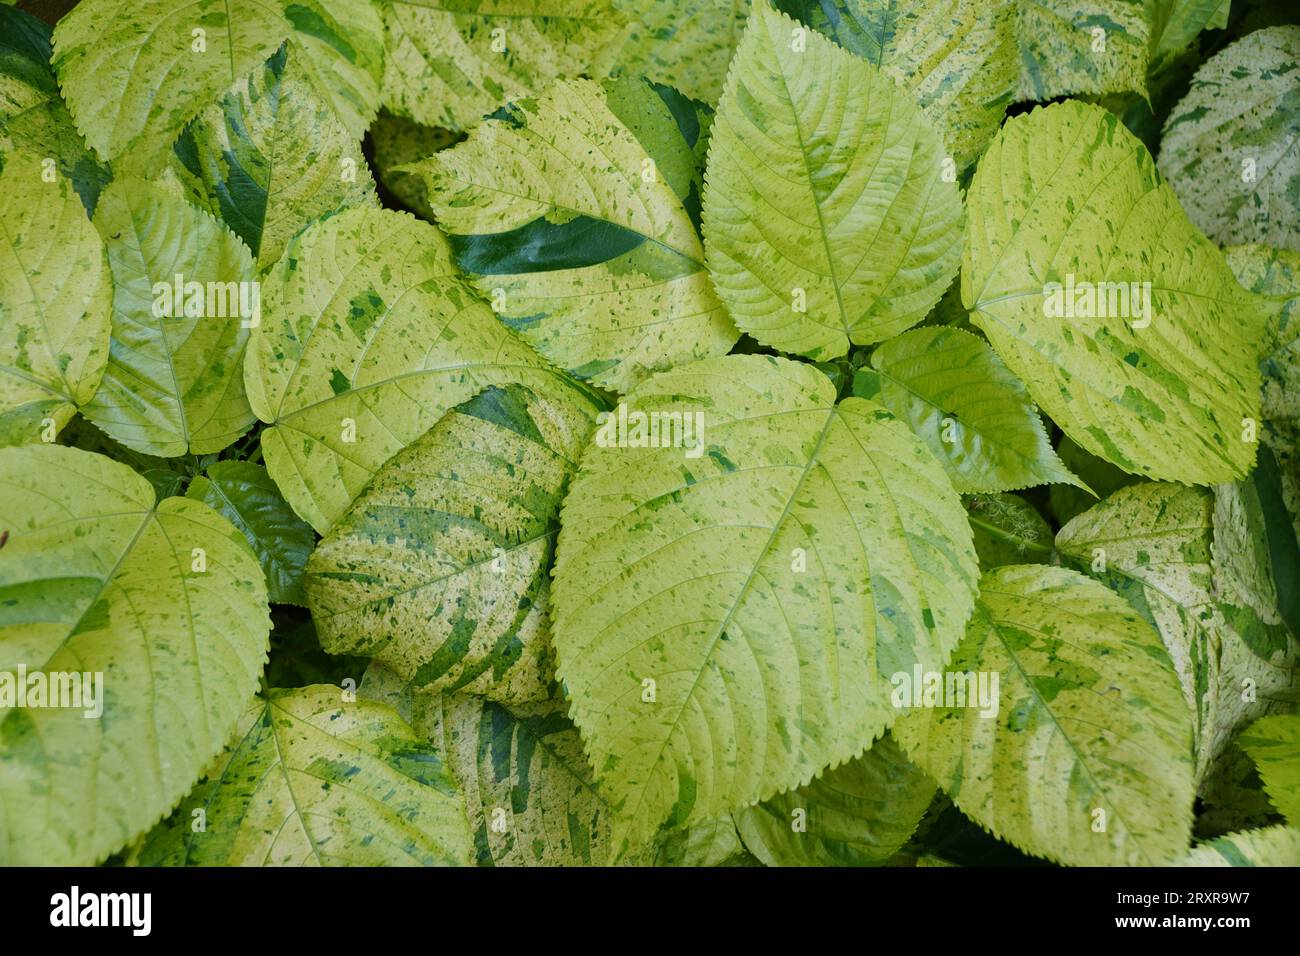 Bright green colors of Copperleaf 'Kona Gold' leaves, with scientific name Acalypha wilkesiana Stock Photo